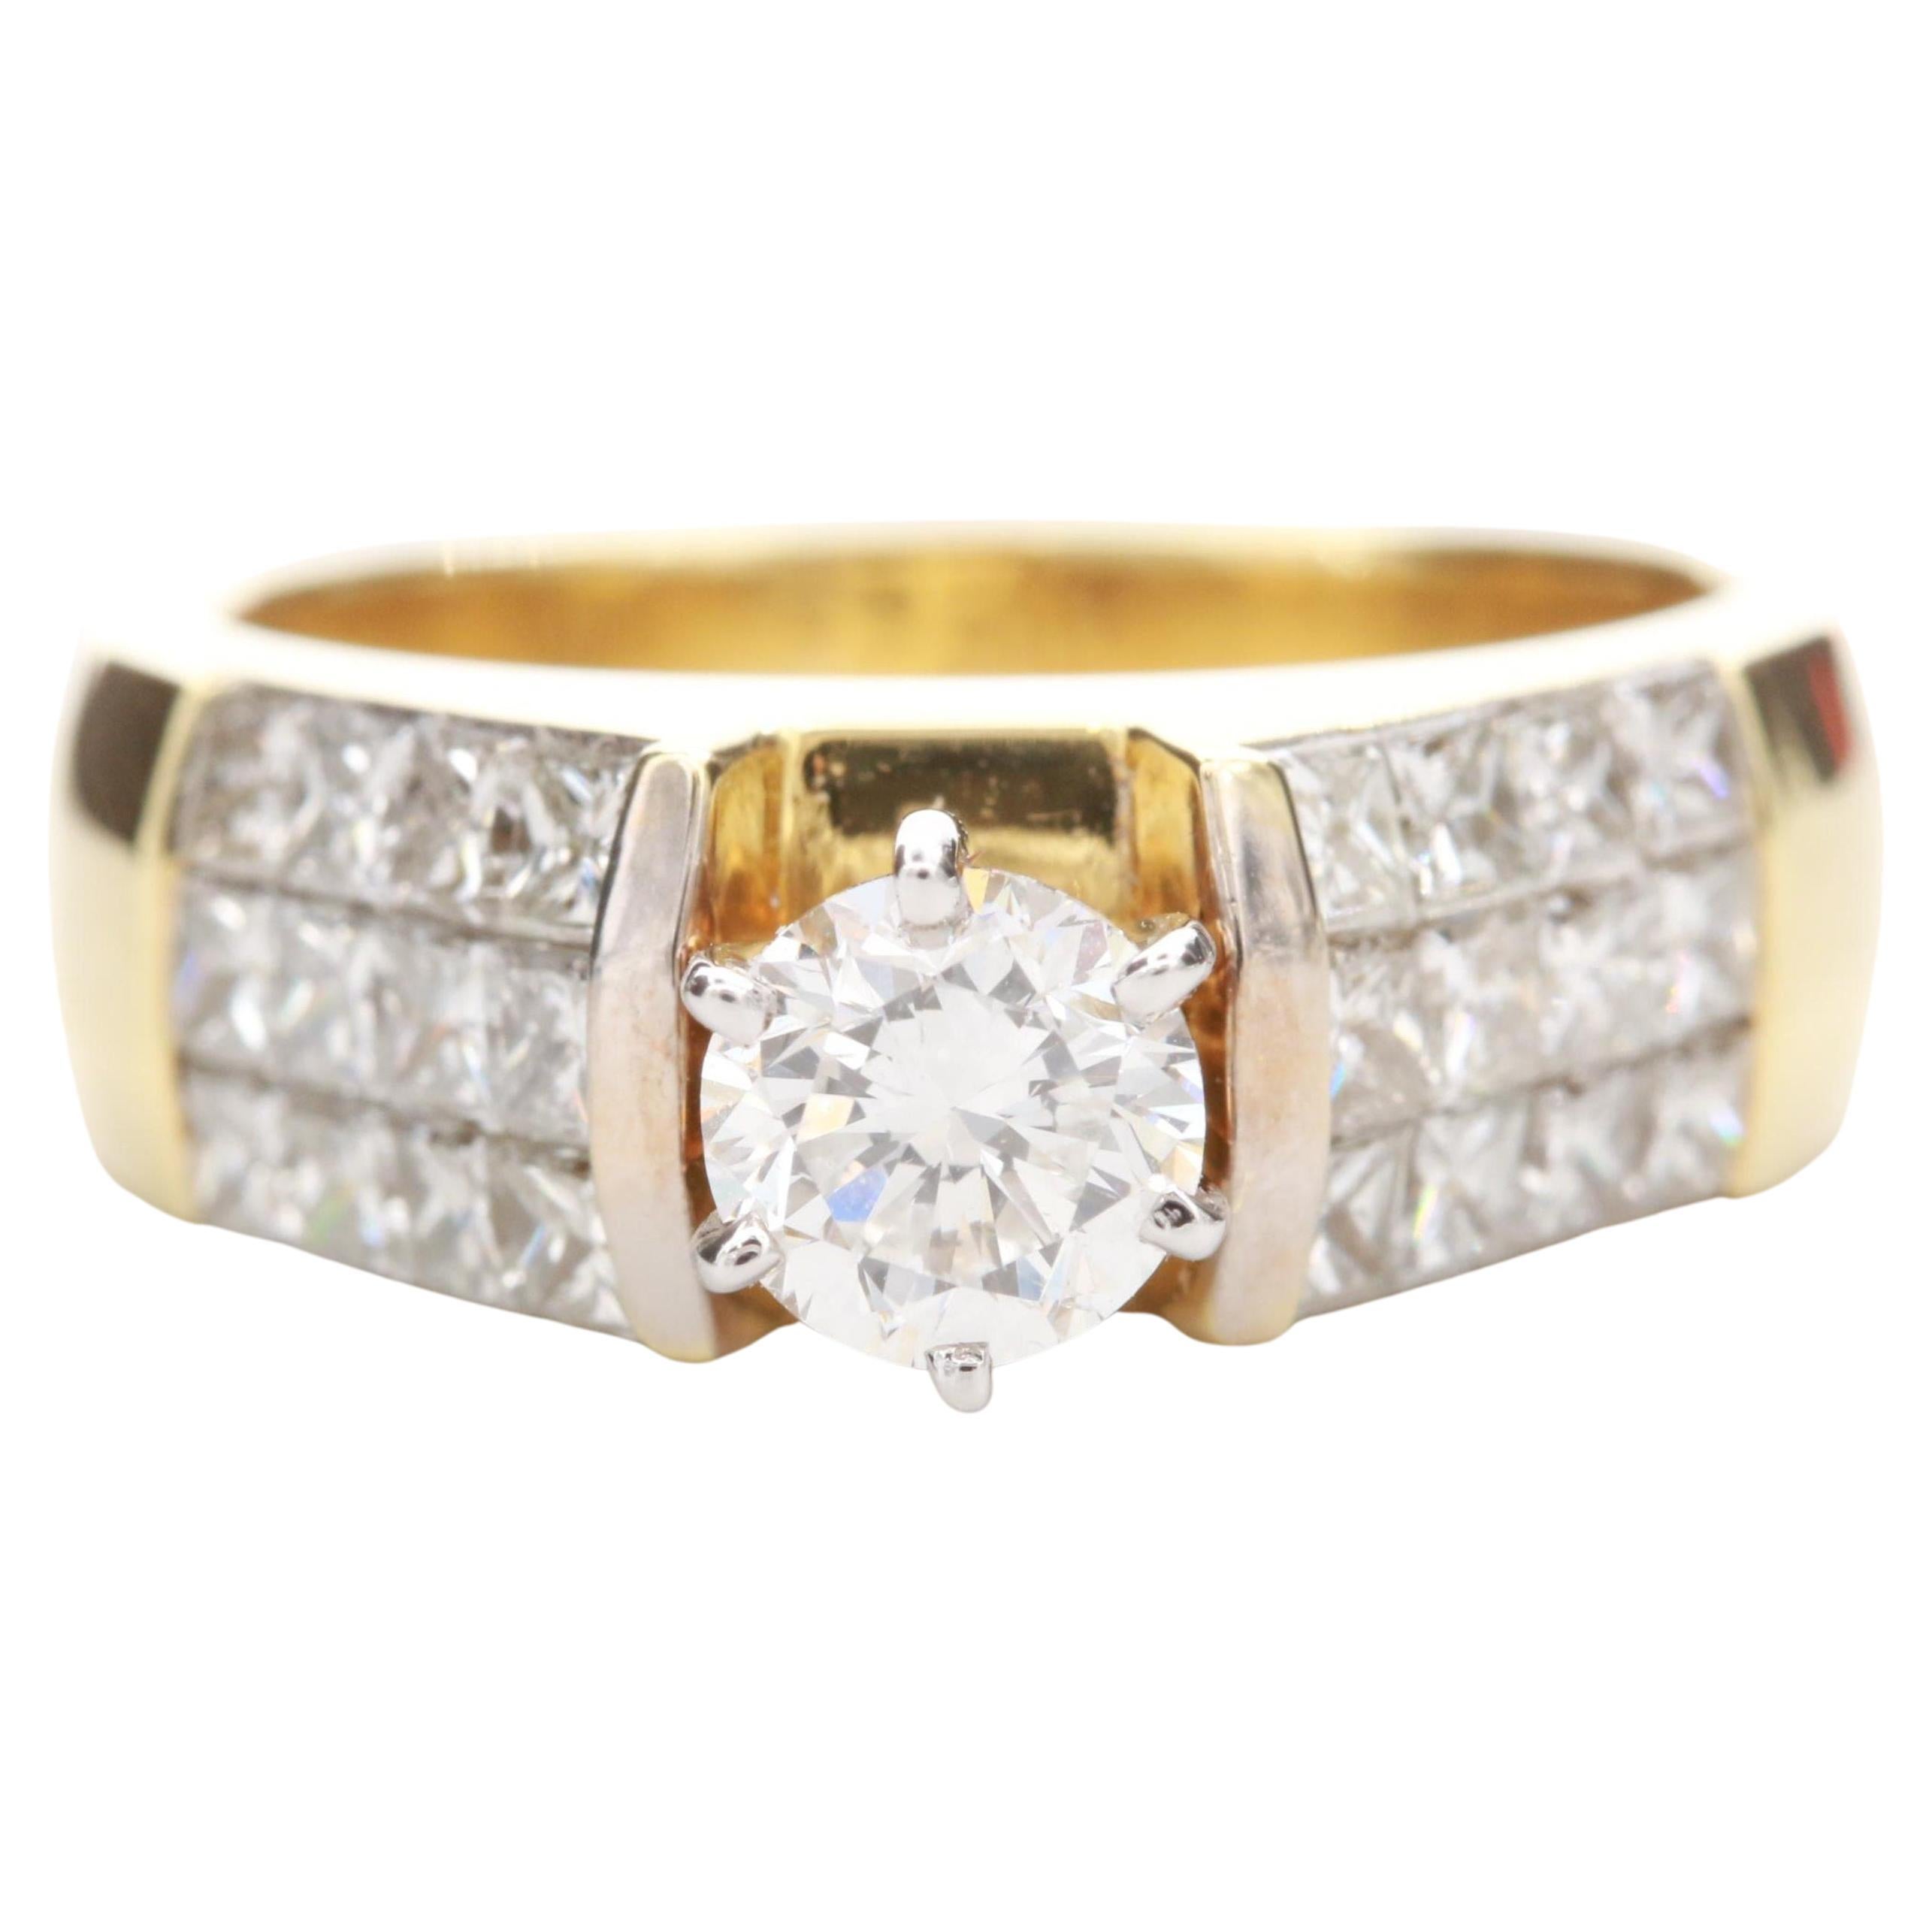 For Sale:  Antique 3 CT Natural Diamond Engagement Ring in 18K Gold, Men's Solitaire Ring